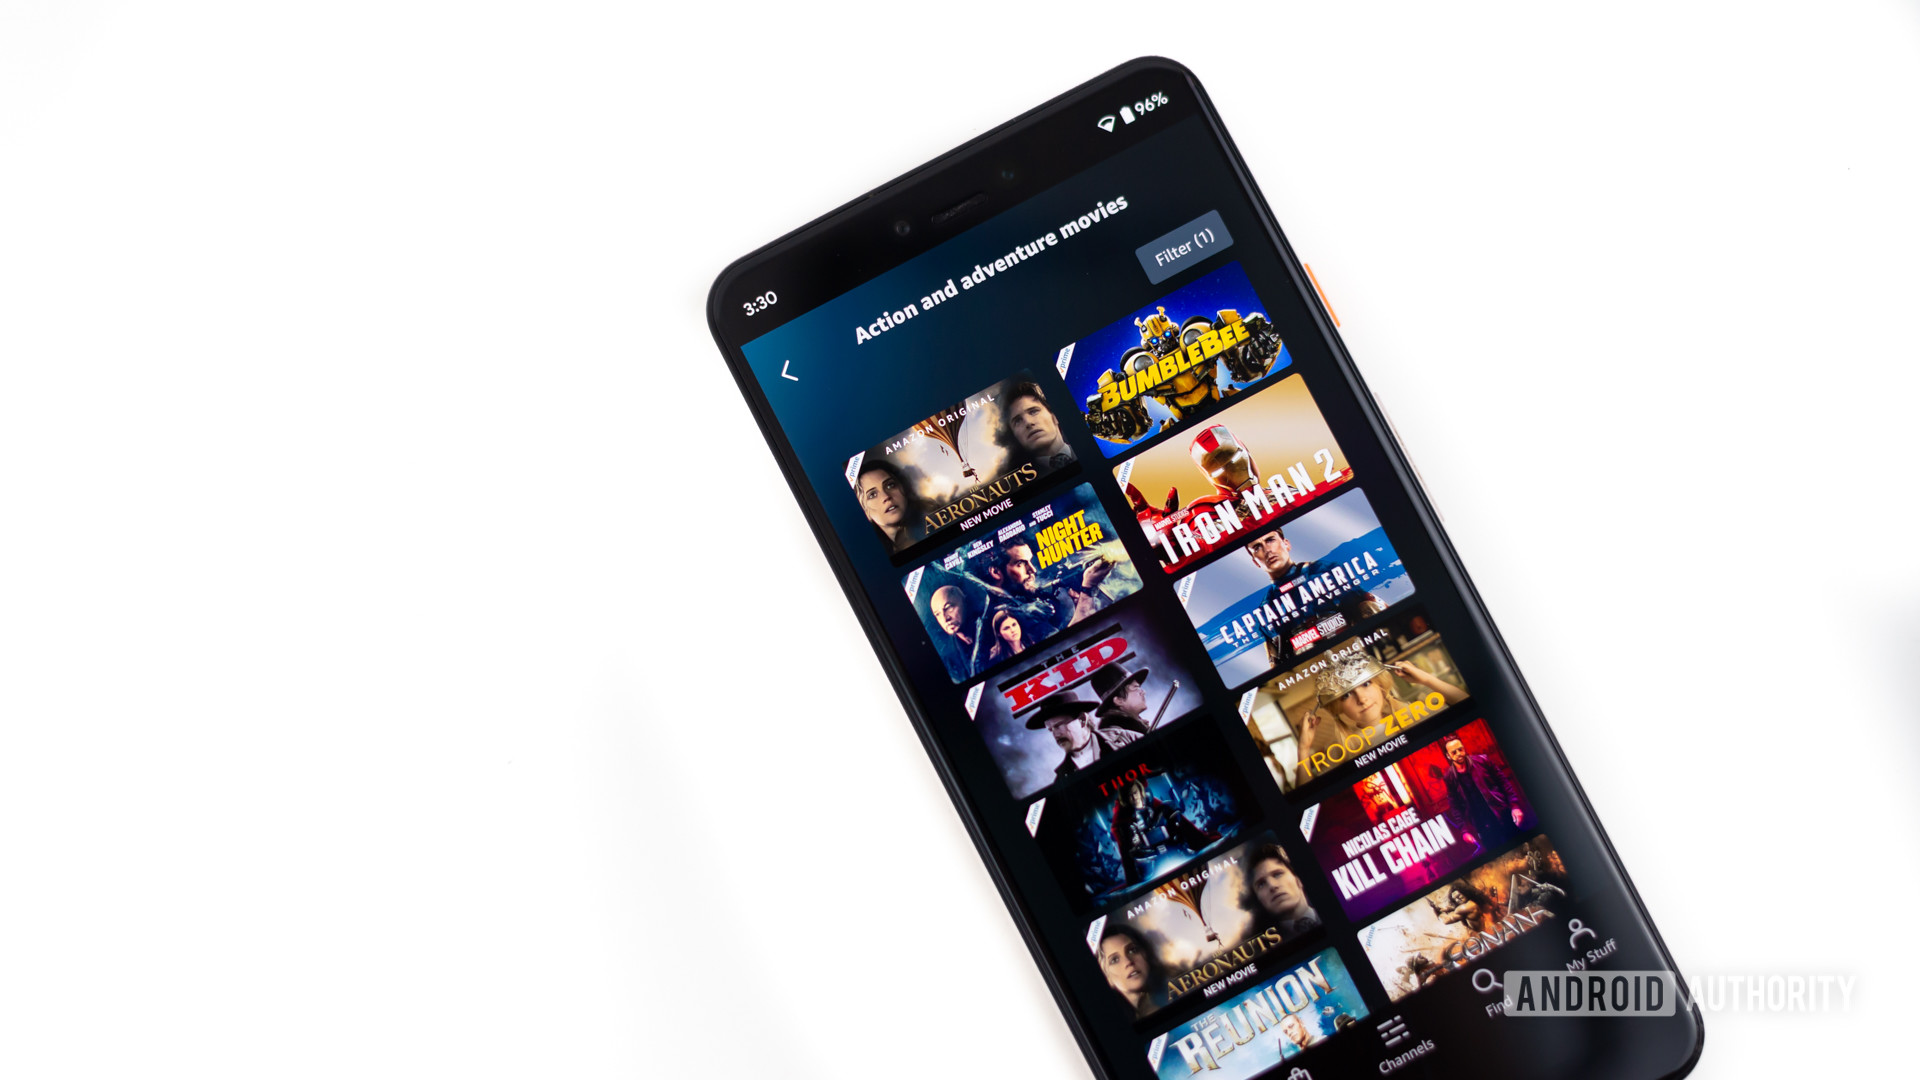 Amazon Prime Video Action and Adventure section shown on smartphone 3